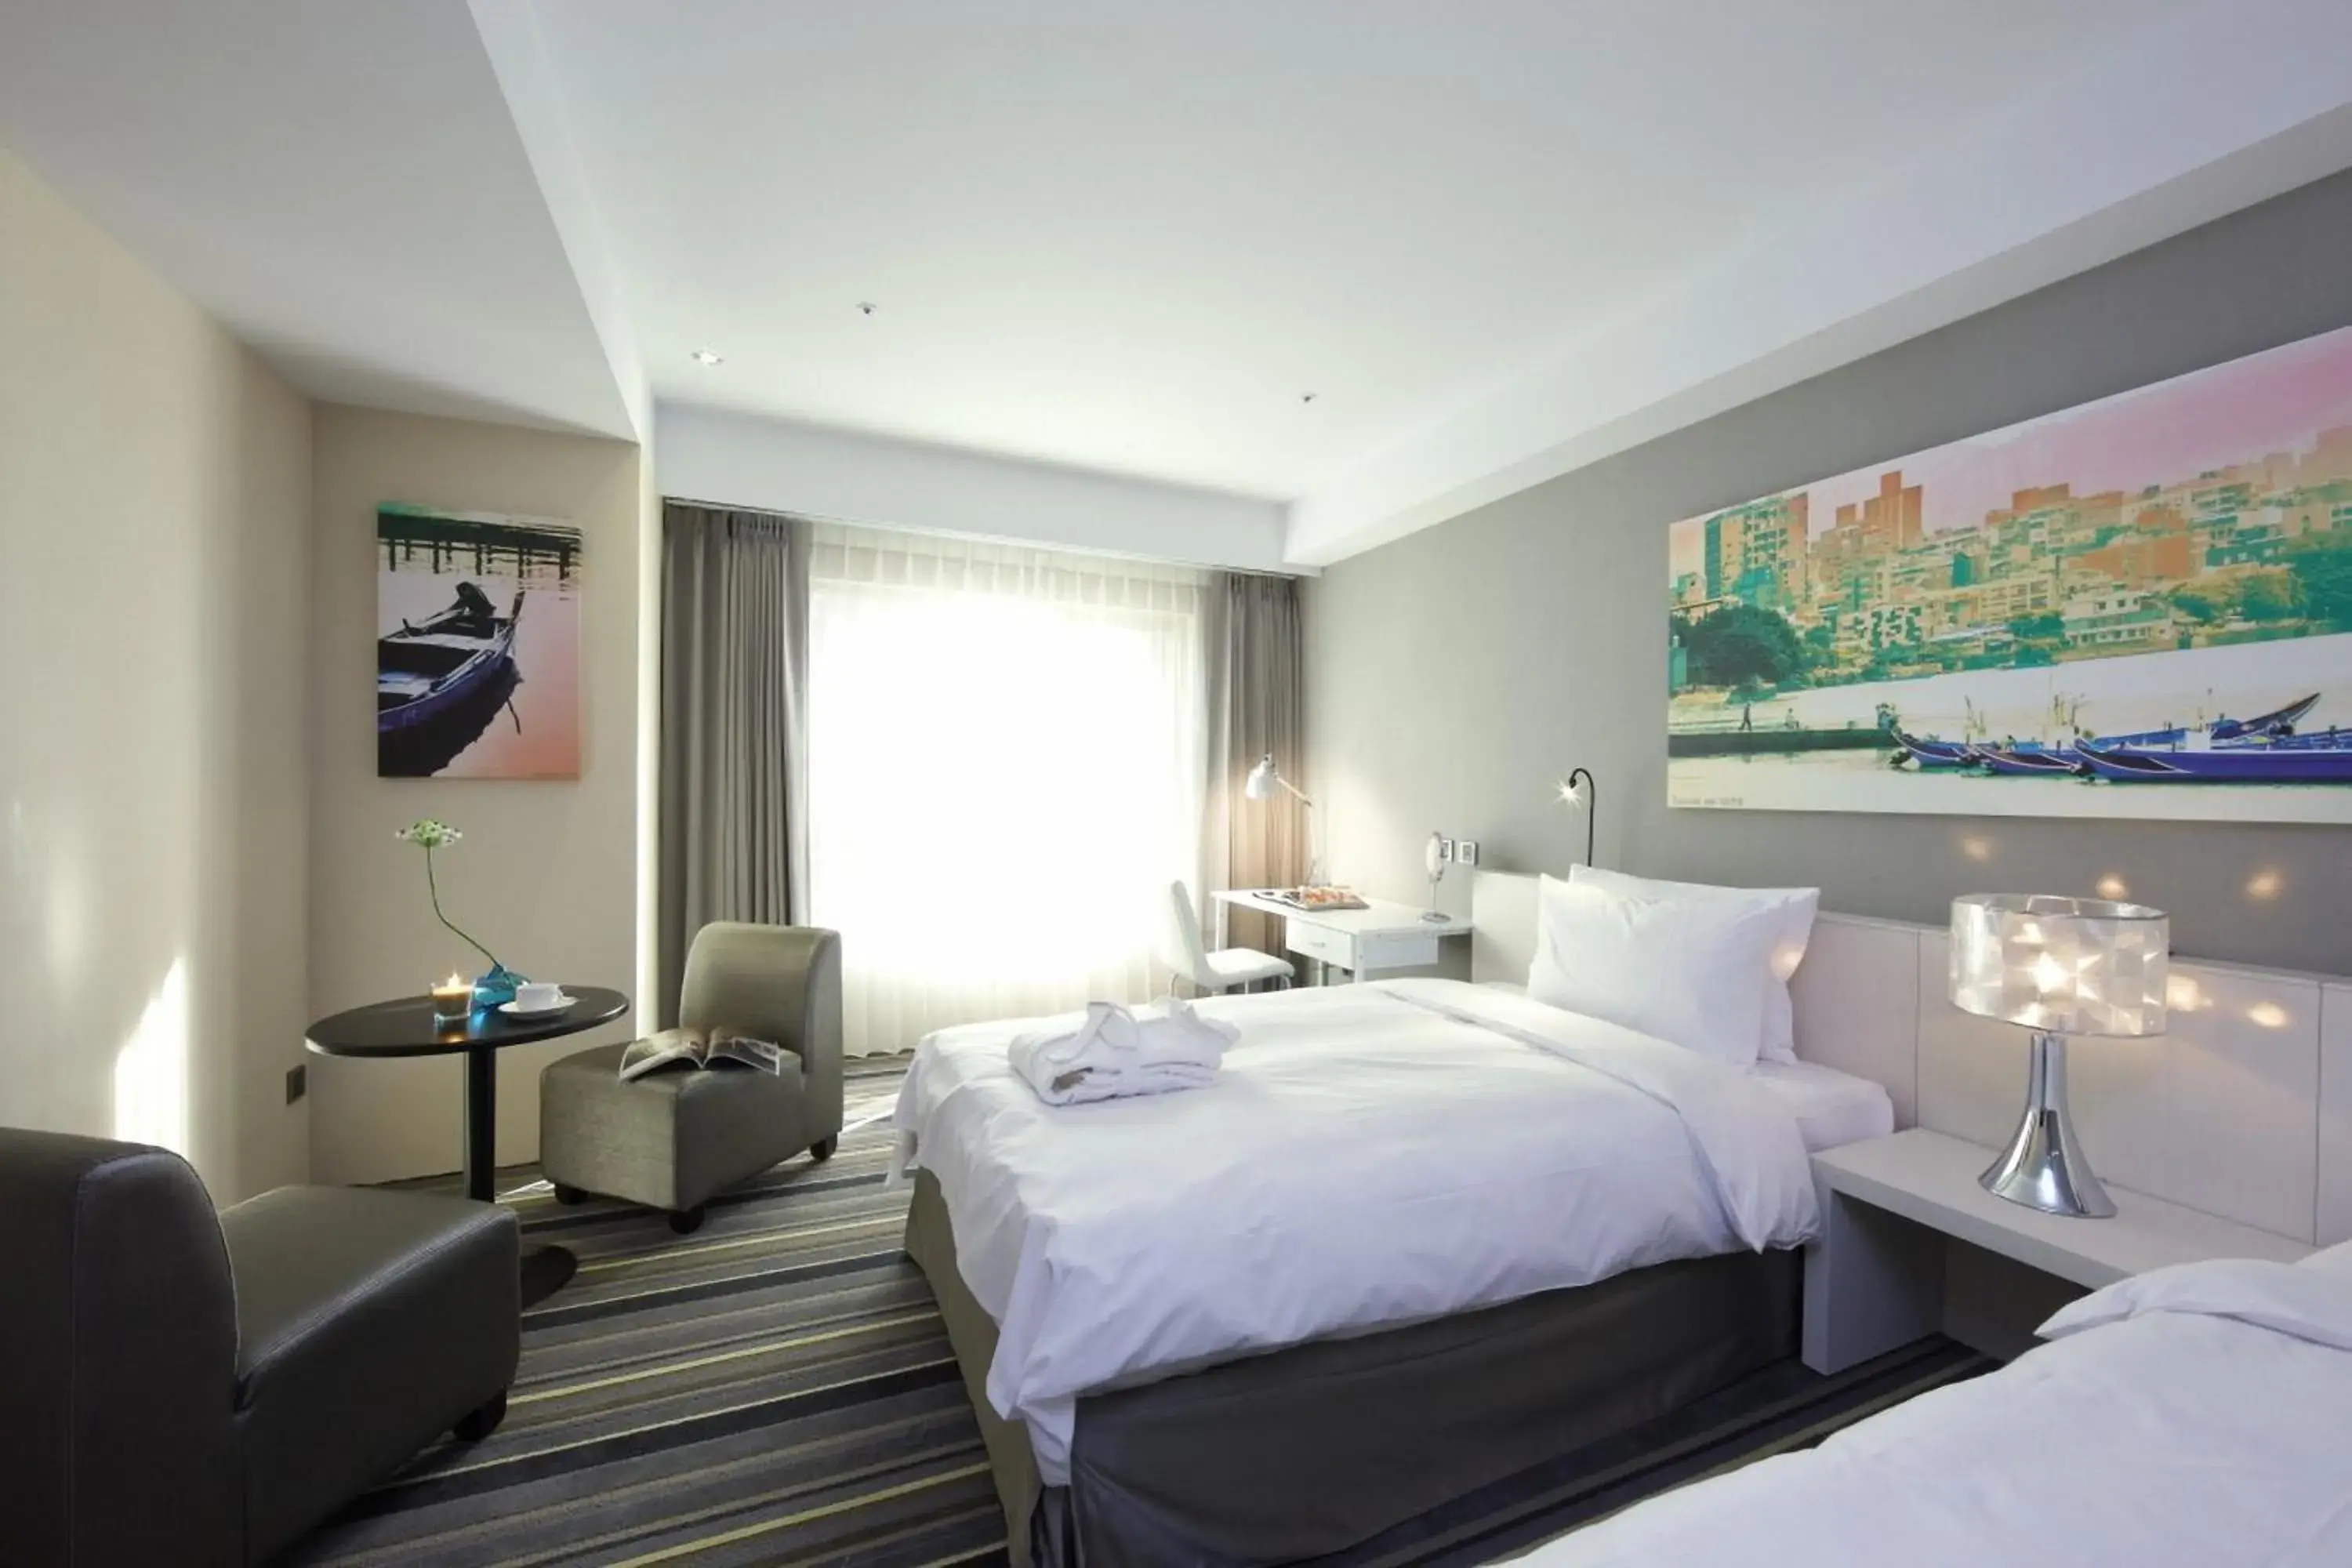 Bedroom in Hotelday Plus Tamsui